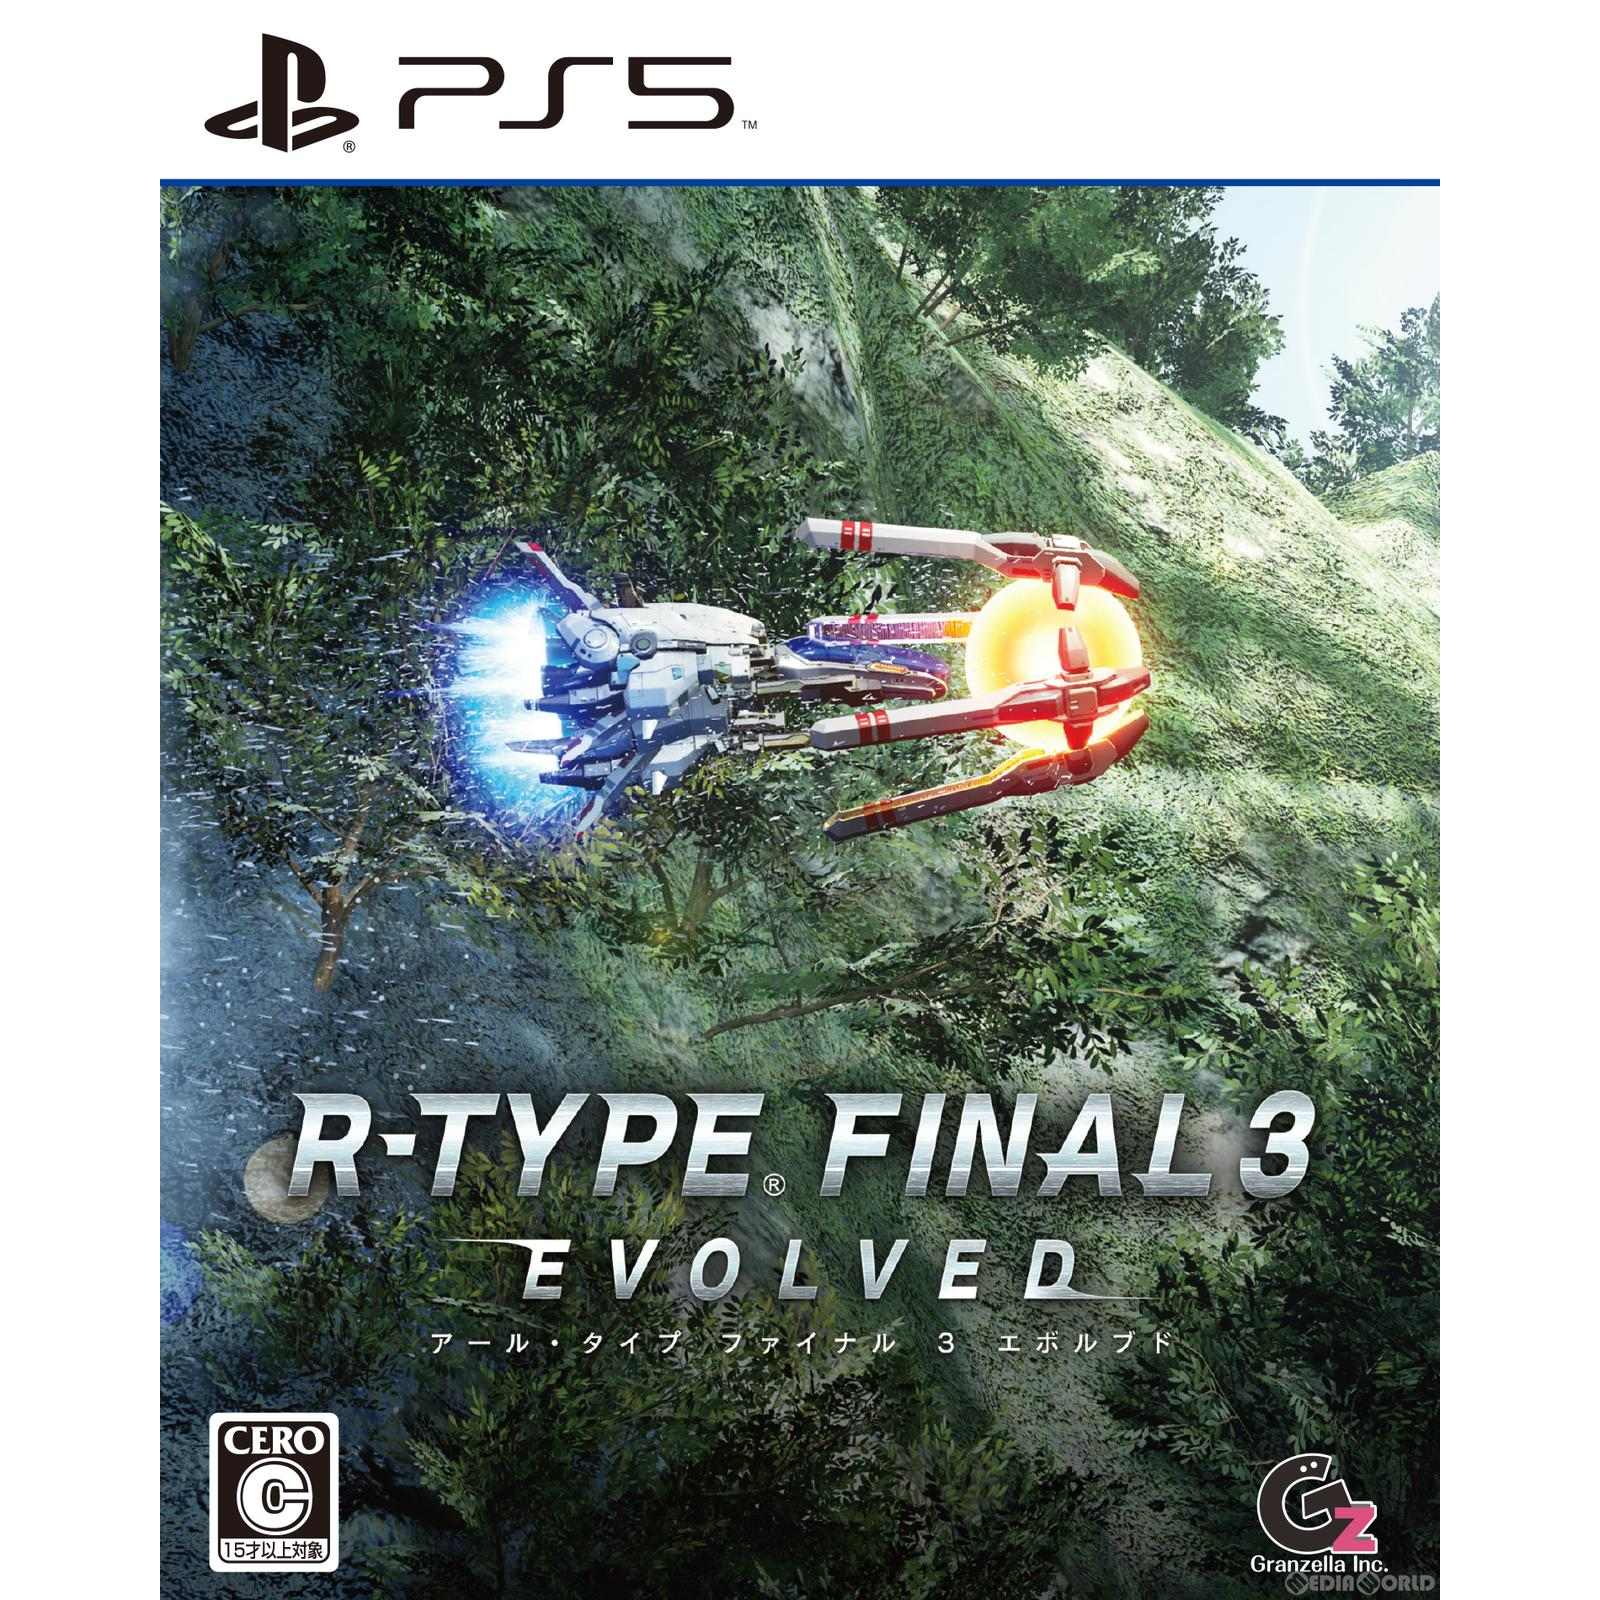 R-TYPE FINAL 3 EVOLVED(アール・タイプ ファイナル 3 エボルブド)(20230323)